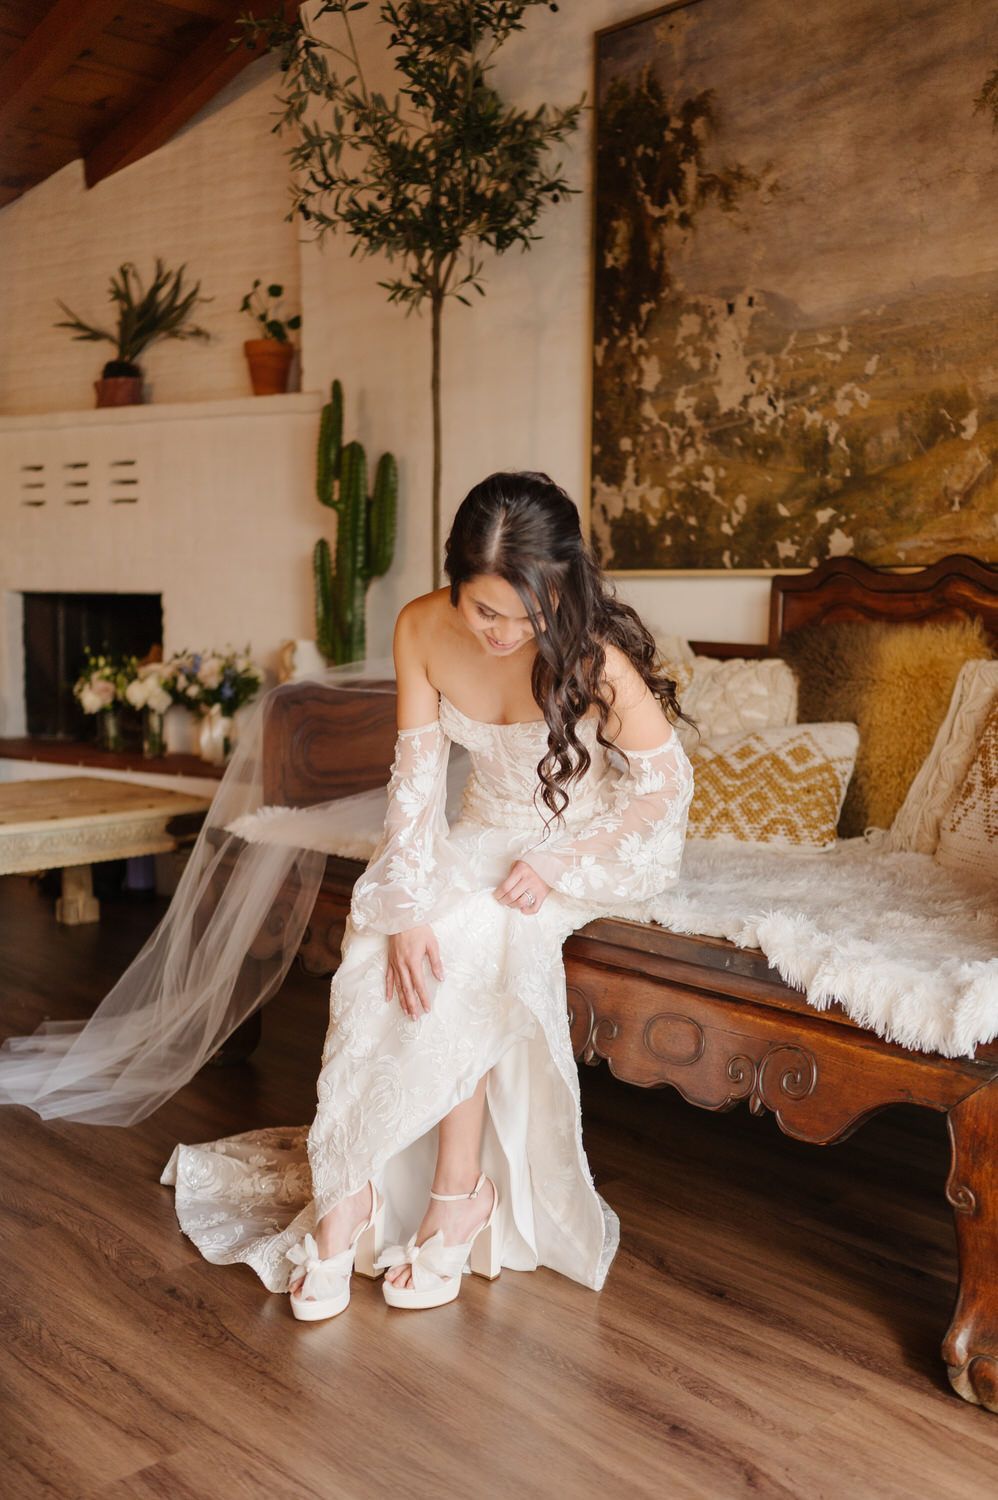 A bride in a wedding dress is sitting on a bench putting on her shoes.